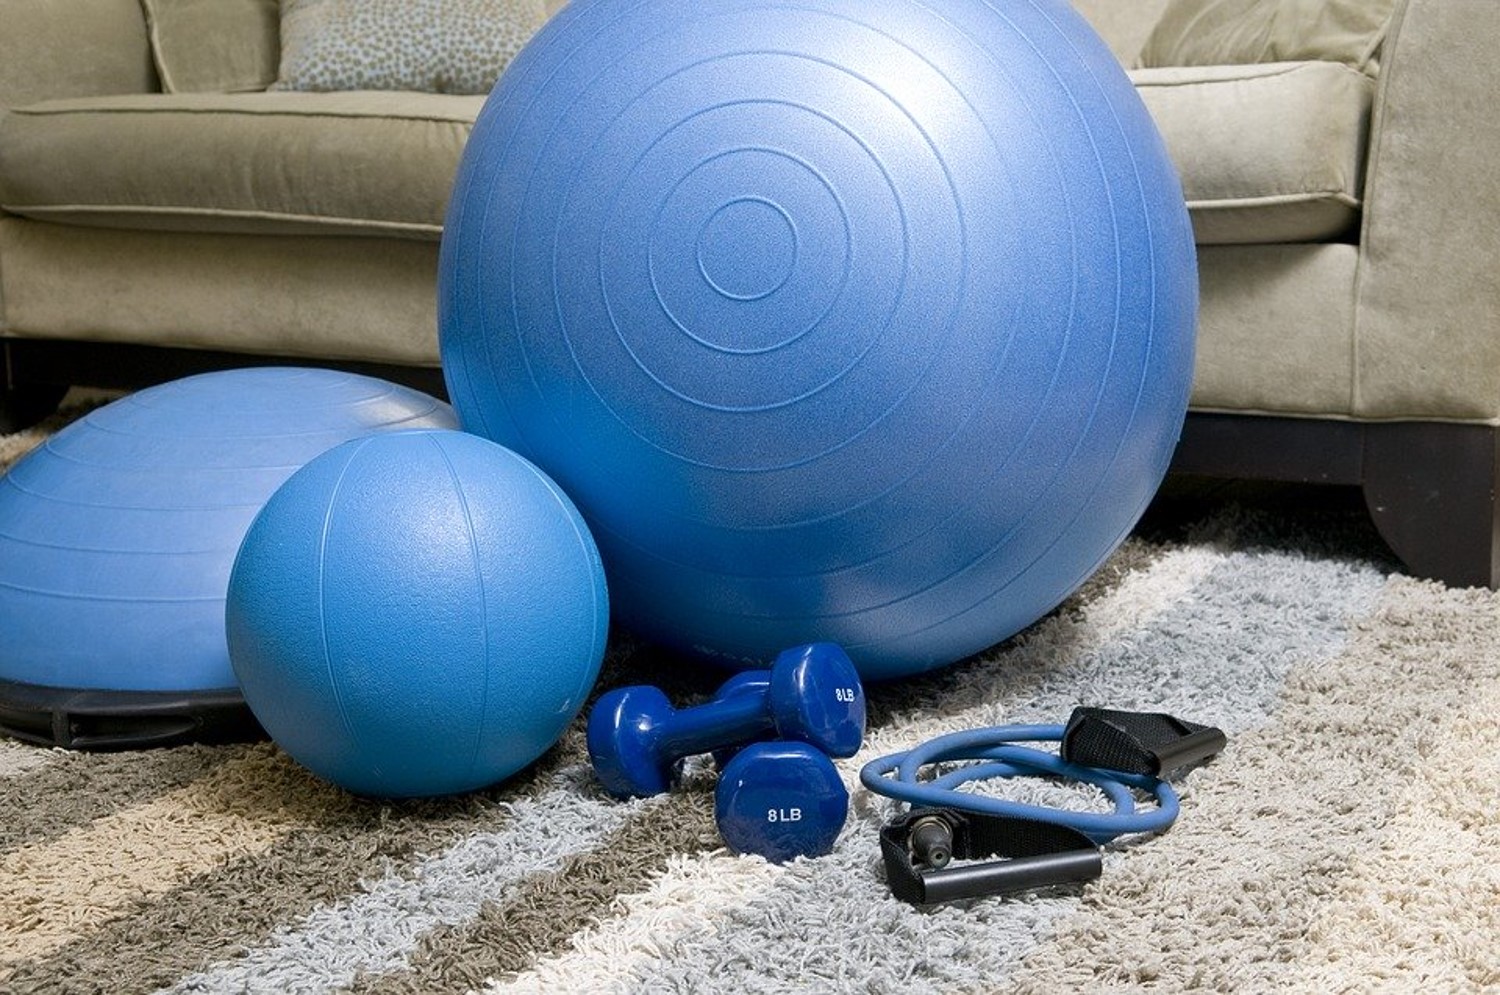 Exercise equipment for remote workers working from home.